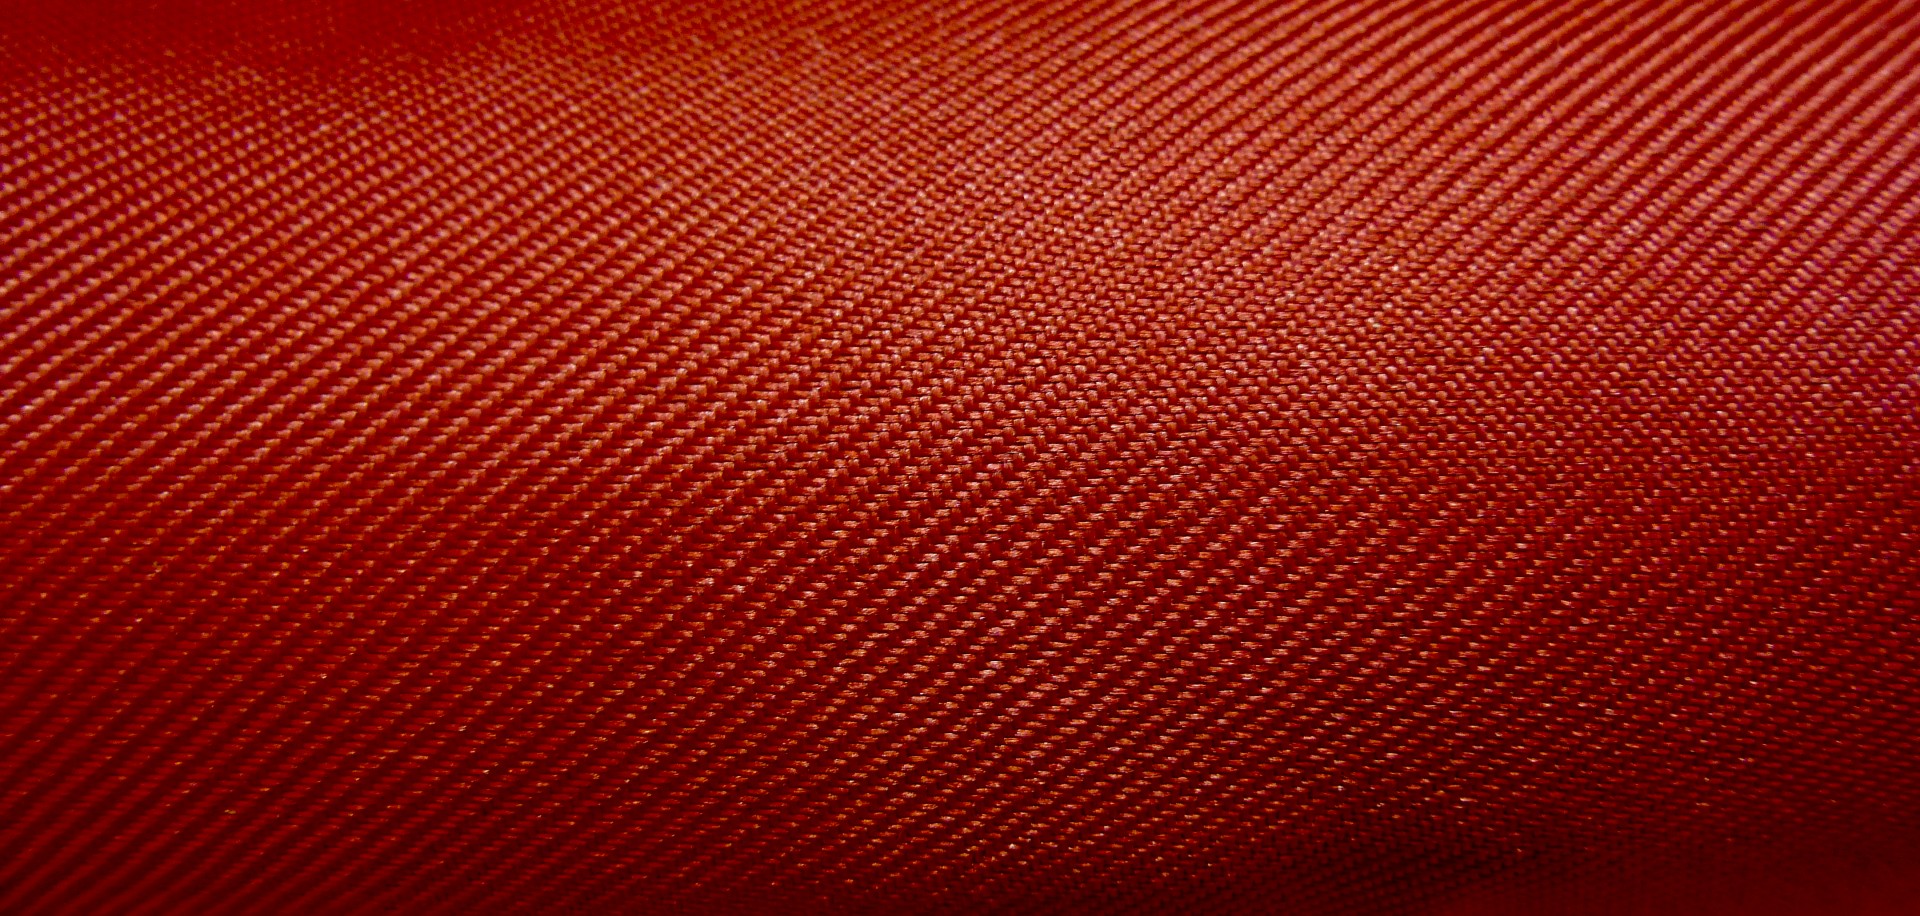 red fabric texture free photo